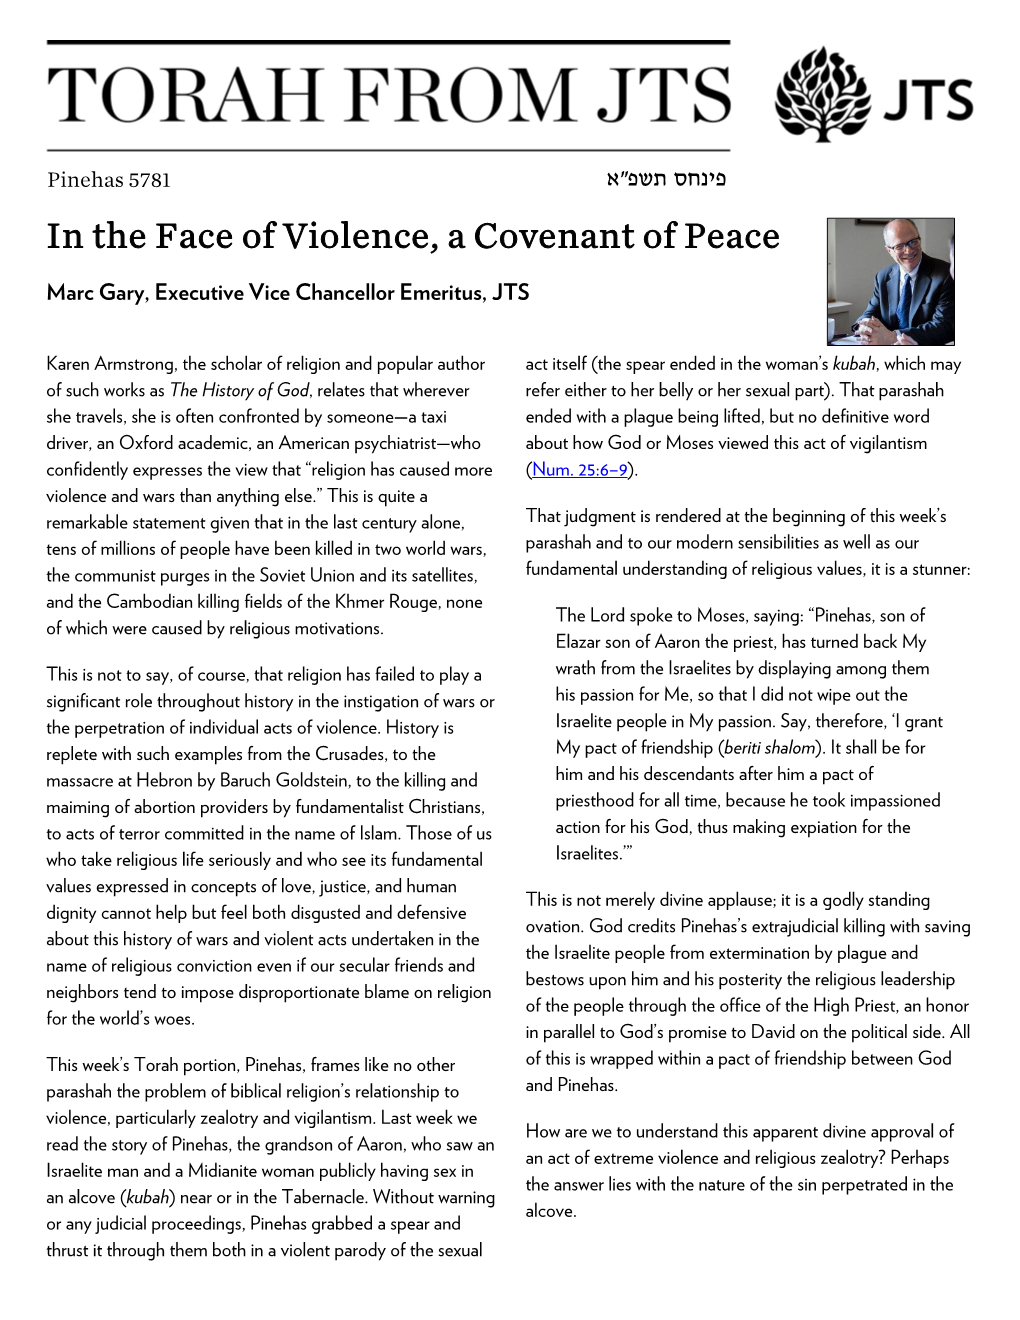 In the Face of Violence, a Covenant of Peace